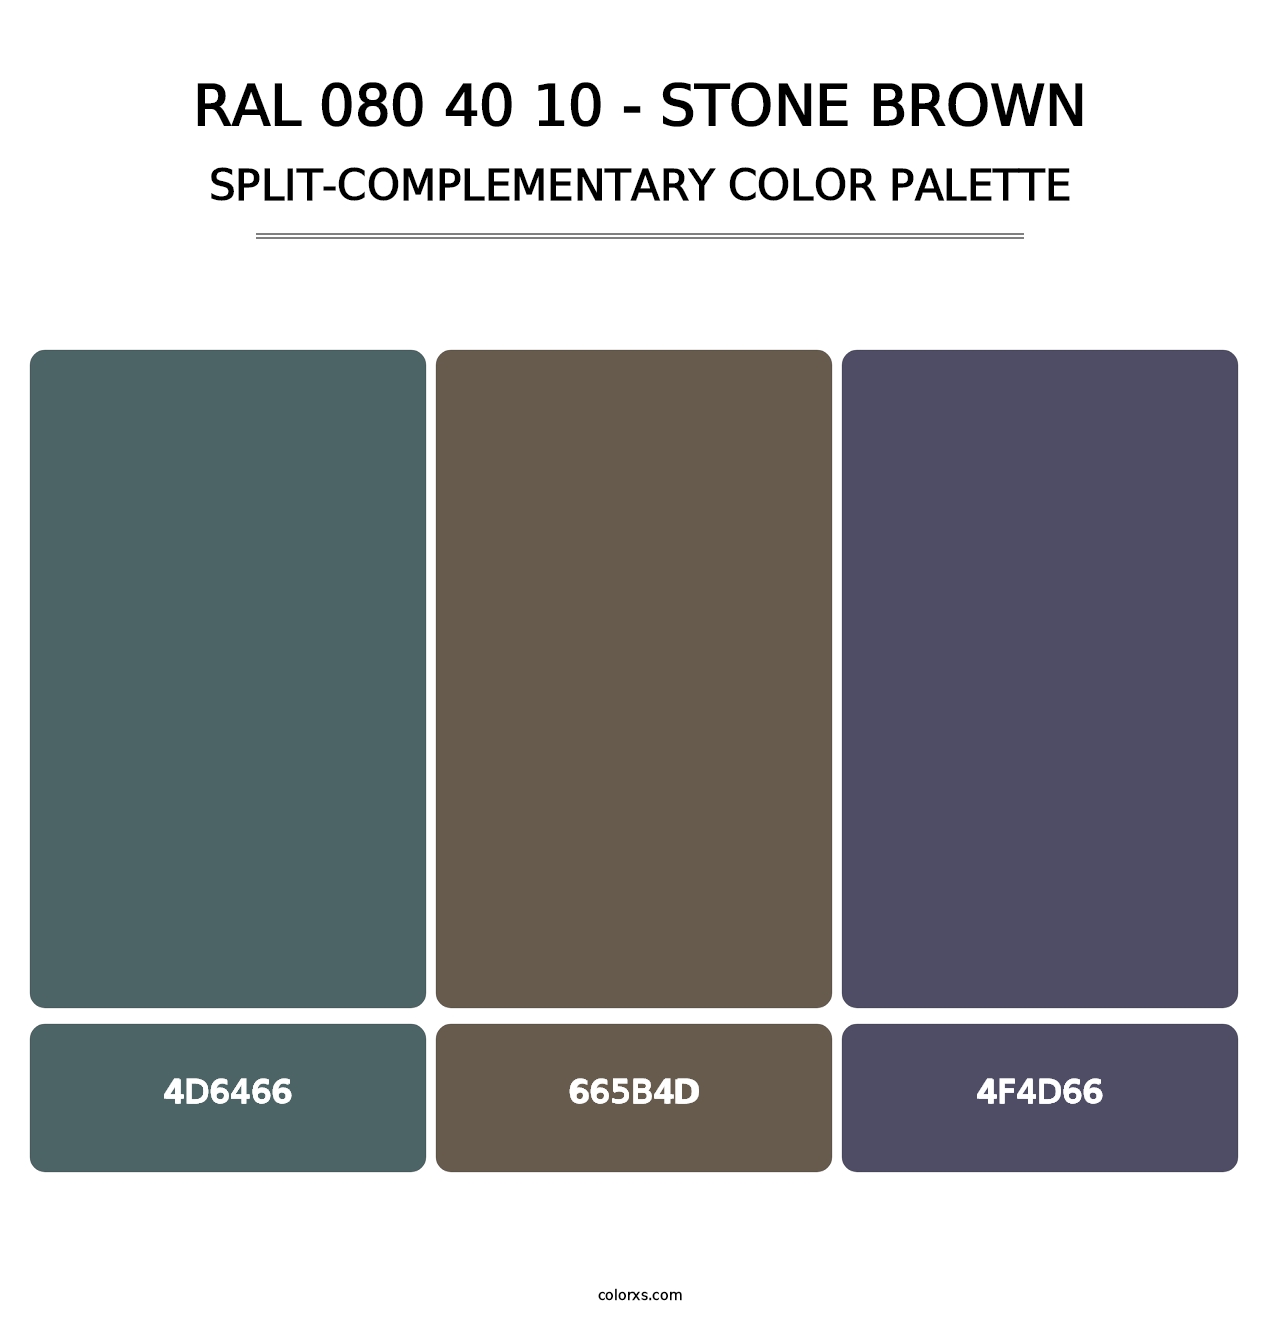 RAL 080 40 10 - Stone Brown - Split-Complementary Color Palette